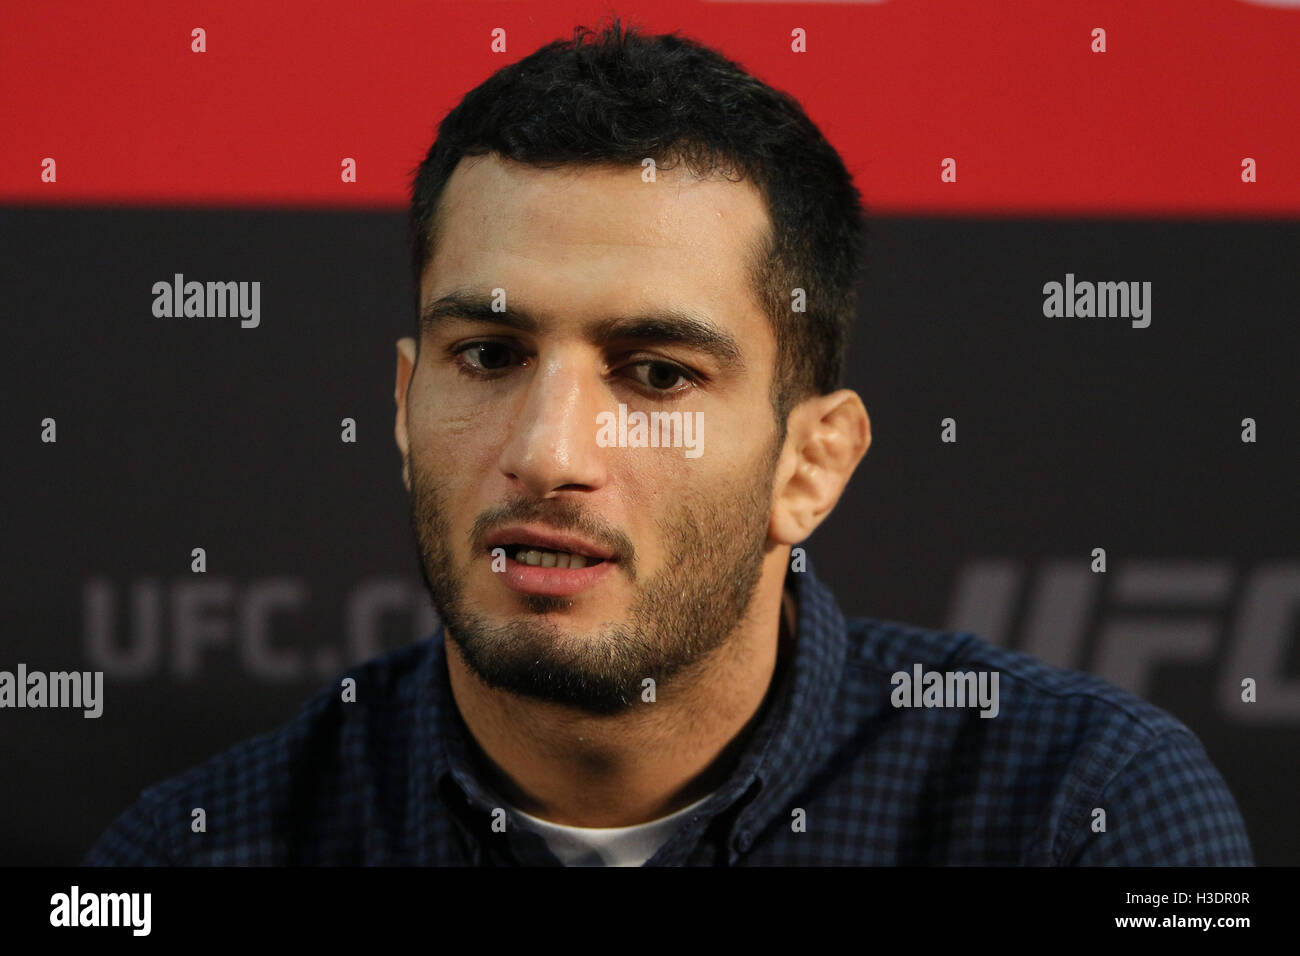 Manchester, UK. 6th October, 2016. UFC 204 - Media Day at Arena Manchester. Thursday the 6 of Oct. 2016. Gegard Mousasi answers media questions ahead of UFC 204.   Credit:  Dan Cooke/Alamy Live News Stock Photo